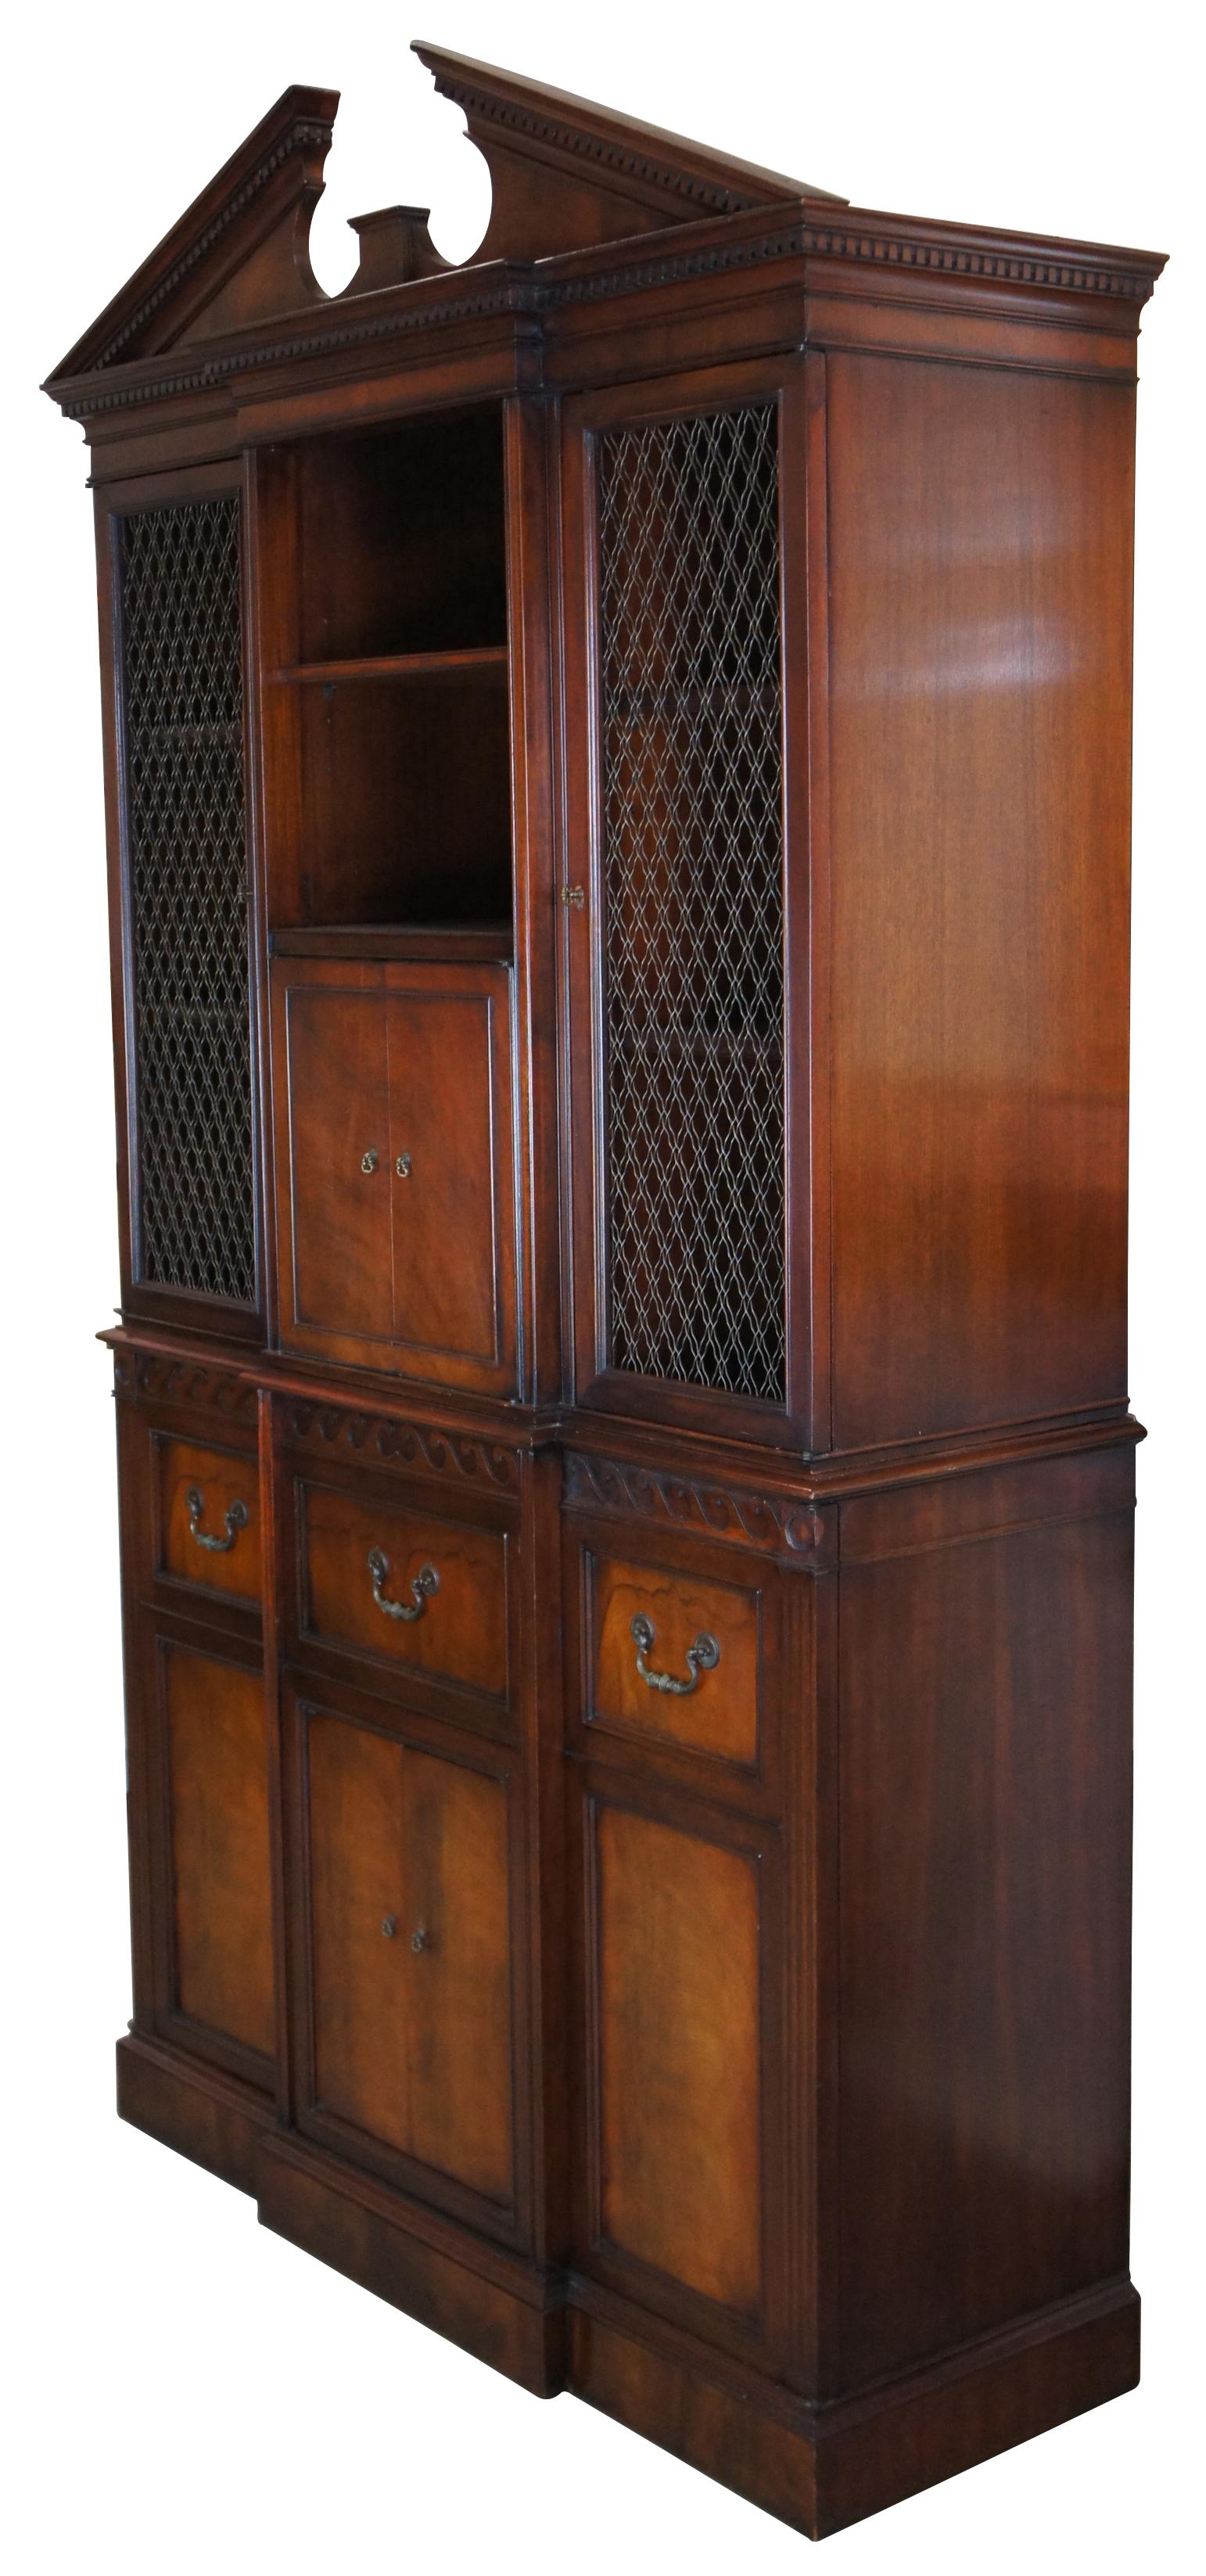 1940s Imperial Windsor cabinet by Drexel & Magnavox. A beautiful Federal style mahogany library bookcase with breakfront form. Features lattice brass wire doors, an open pediment with dentil molding and plenty of shelving for storage of books,